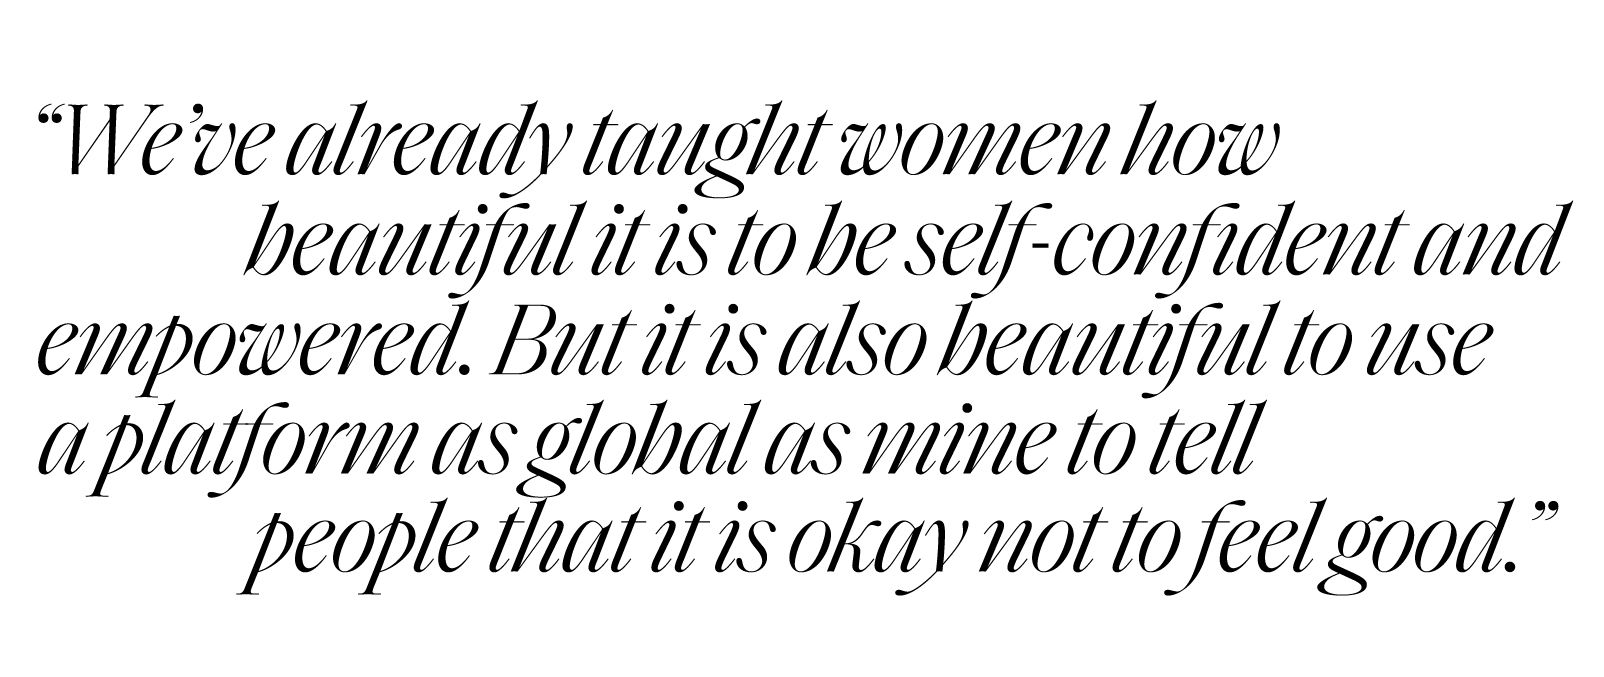 weve already taught women how beautiful it is to be selfconfident and empowered but it is also beautiful to use a platform as global as mine to tell people that it is okay not to feel good